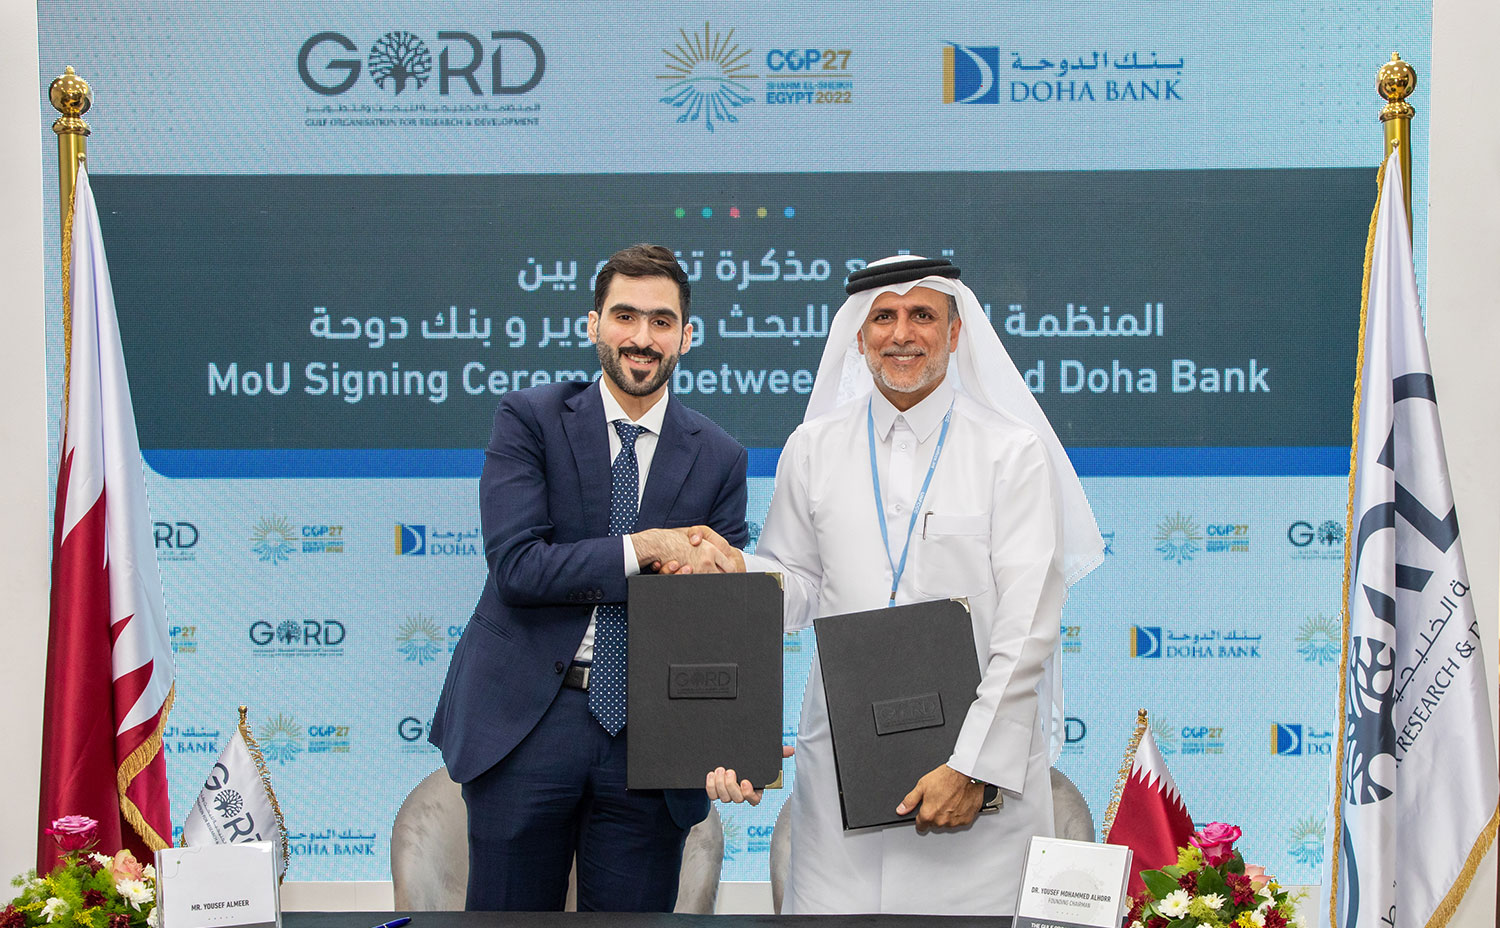 GORD and Doha Bank commence climate partnership at COP27